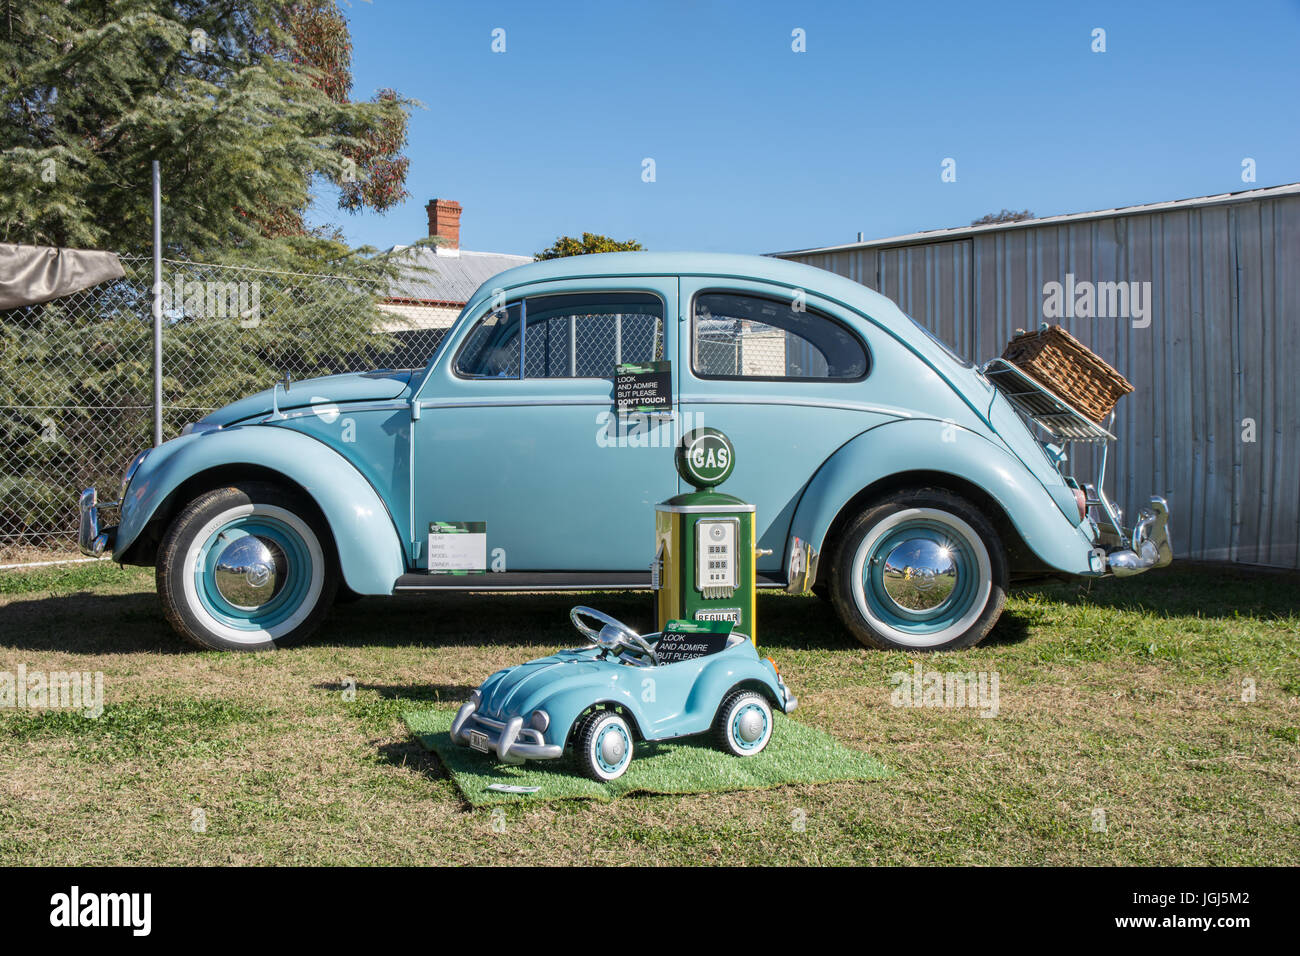 A Restored 1961 Volkswagen Beetle on display with a childs toy model VW and a small replica petrol bowser at Barraba Australia. Stock Photo